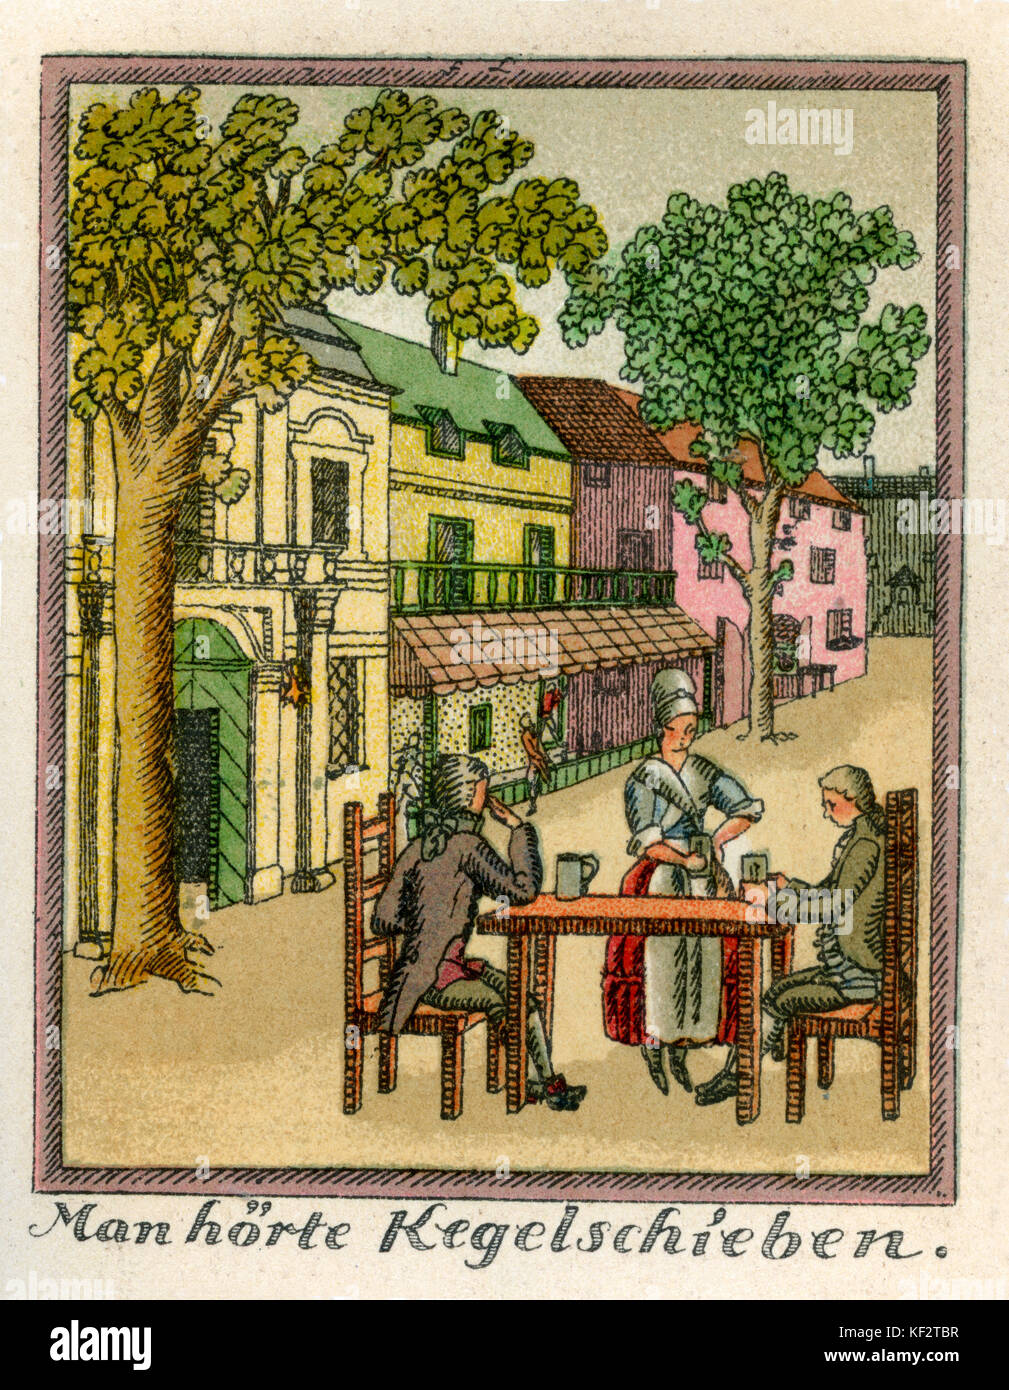 Mozart 's Journey to Prague, 1856.  Fictional account of Mozart's journey with his wife Constanze in Autumn 1787 to Prague, where his opera Don Giovanni was to premiere. Caption reads:' Man hört Kegelschieben'  EM:  German romantic poet and author, 8 September 1804 – 4 June 1875. WAM: Austrian composer, 27 January 1756 - 5 December 1791. Stock Photo